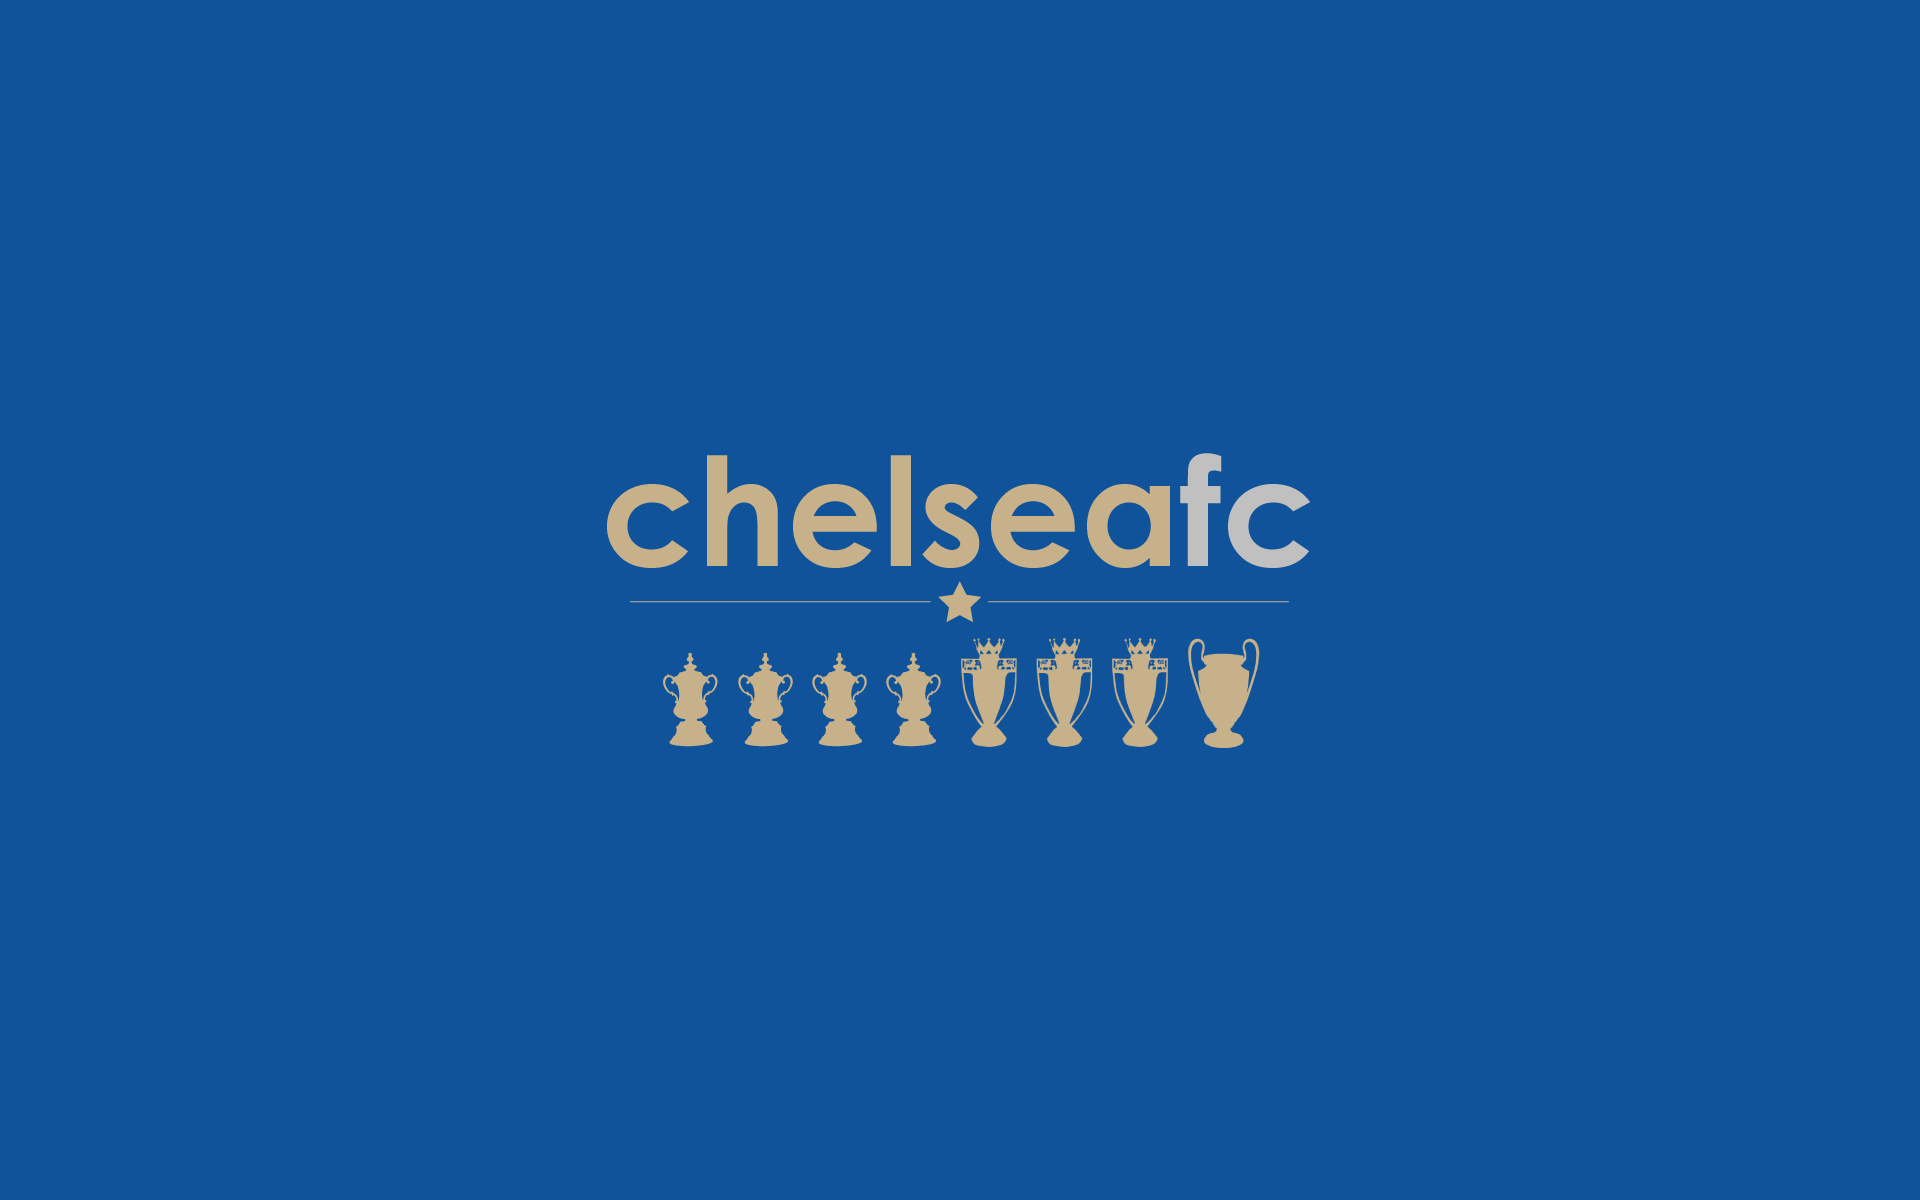 Chelsea: One of the world's top football clubs and reigning champions of Europe. 1920x1200 HD Wallpaper.